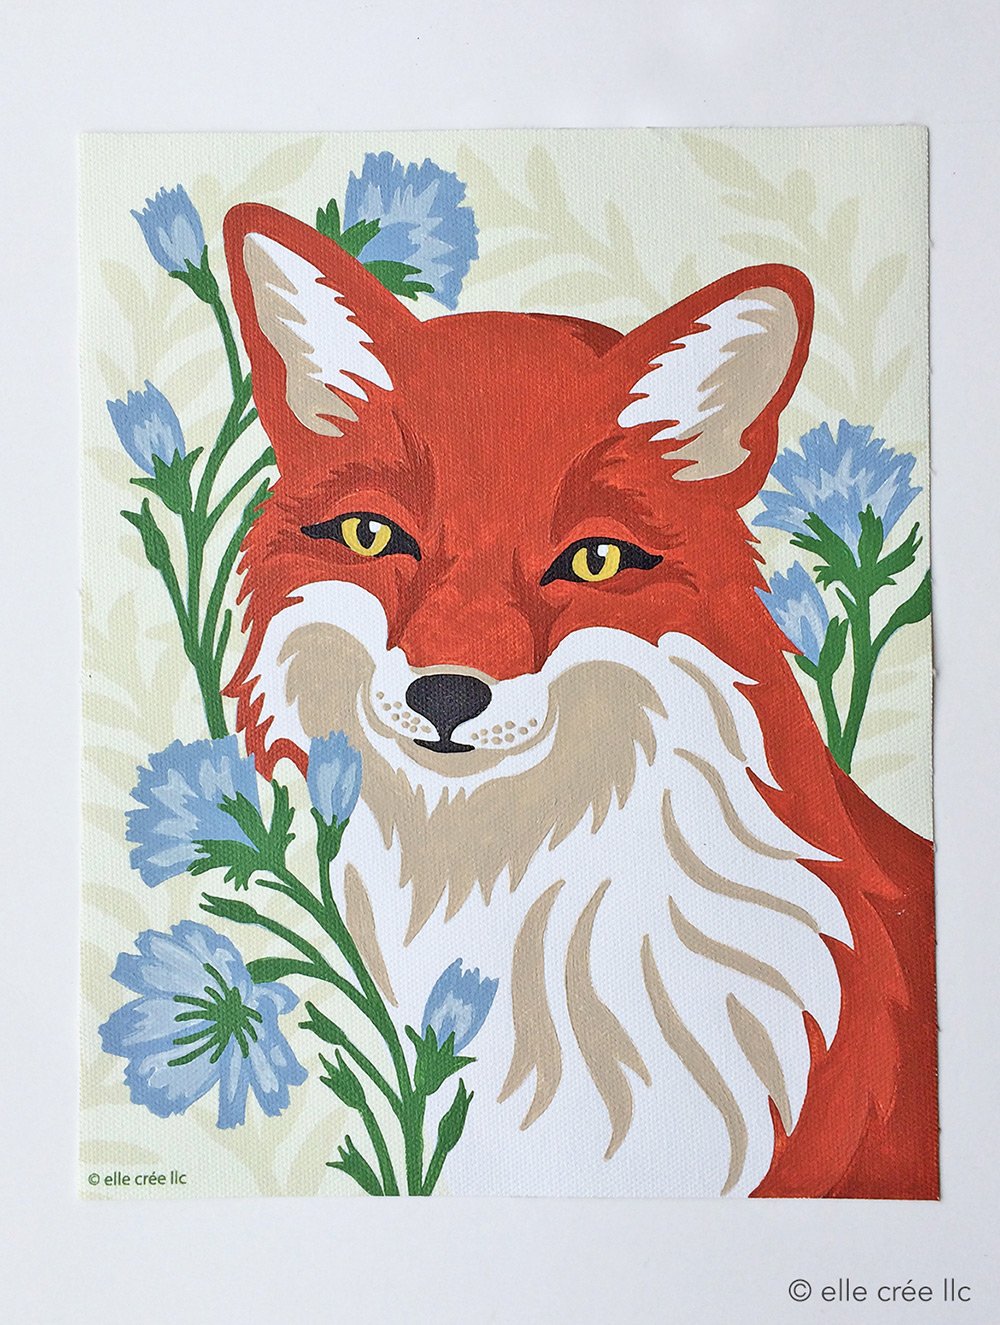 Herrschners A Friend for Little Fox Paint by Number Kit